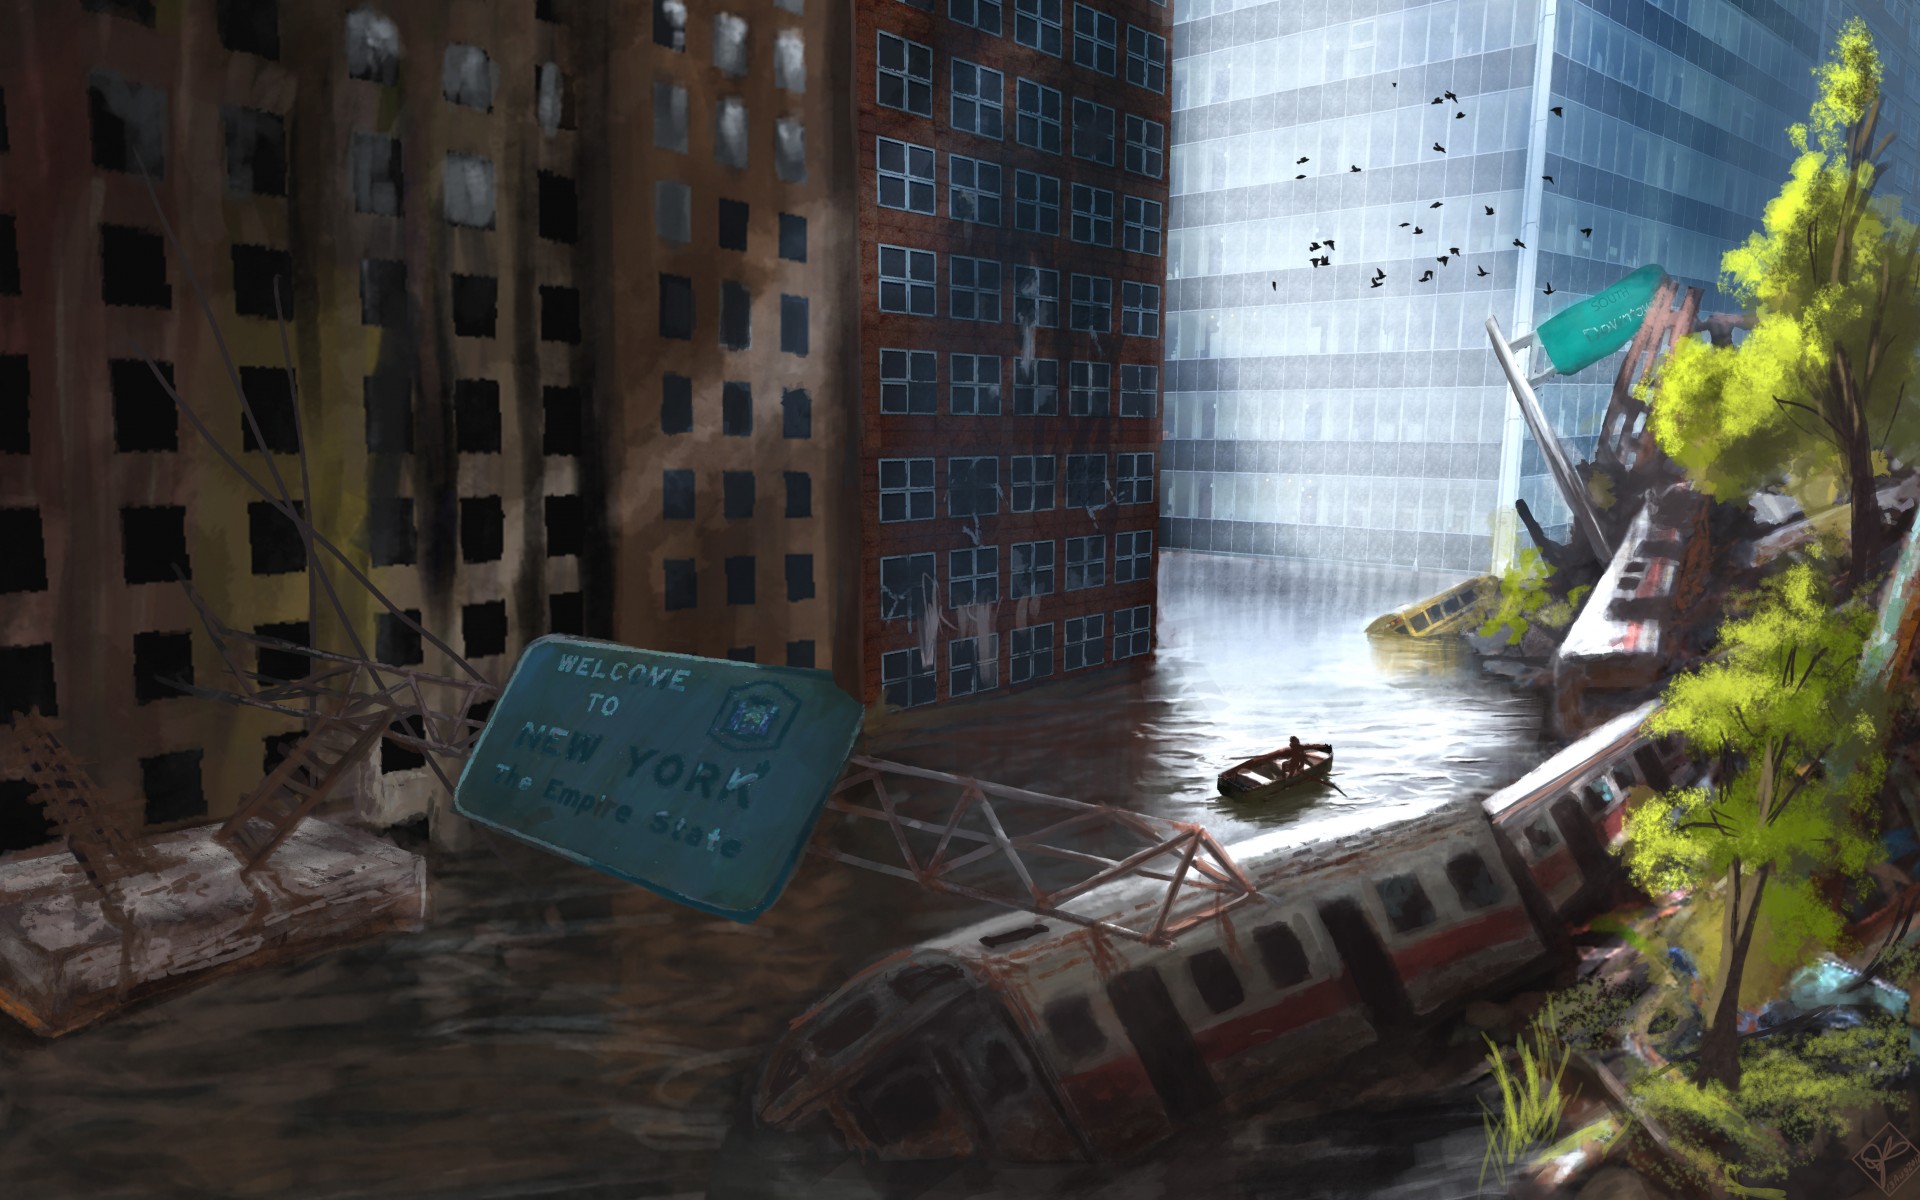 sci fi, Post, Apocalyptic, Flood, Cities, Architecture, Buildings, Dark, People, Boats, Situations, Trains, Roads, Art Wallpaper